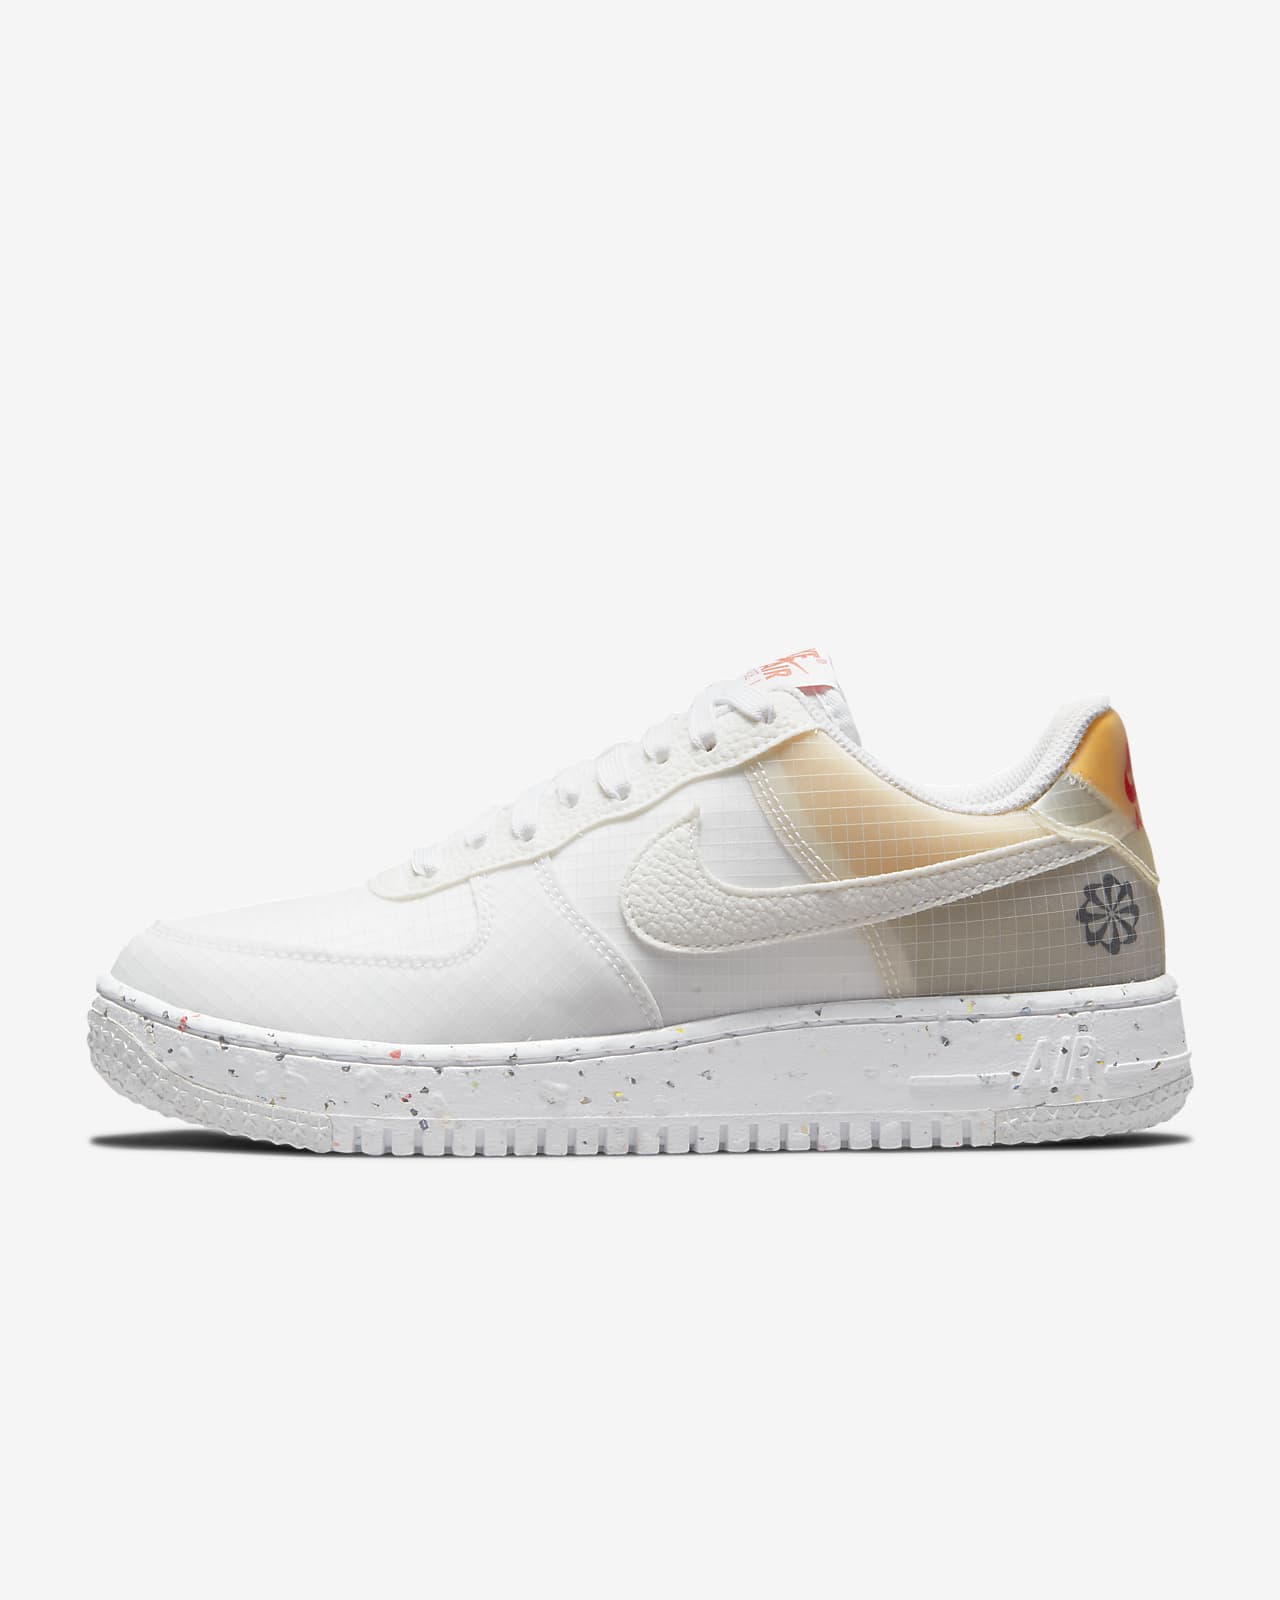 Chaussure Nike Air Force 1 Crater pour Femme